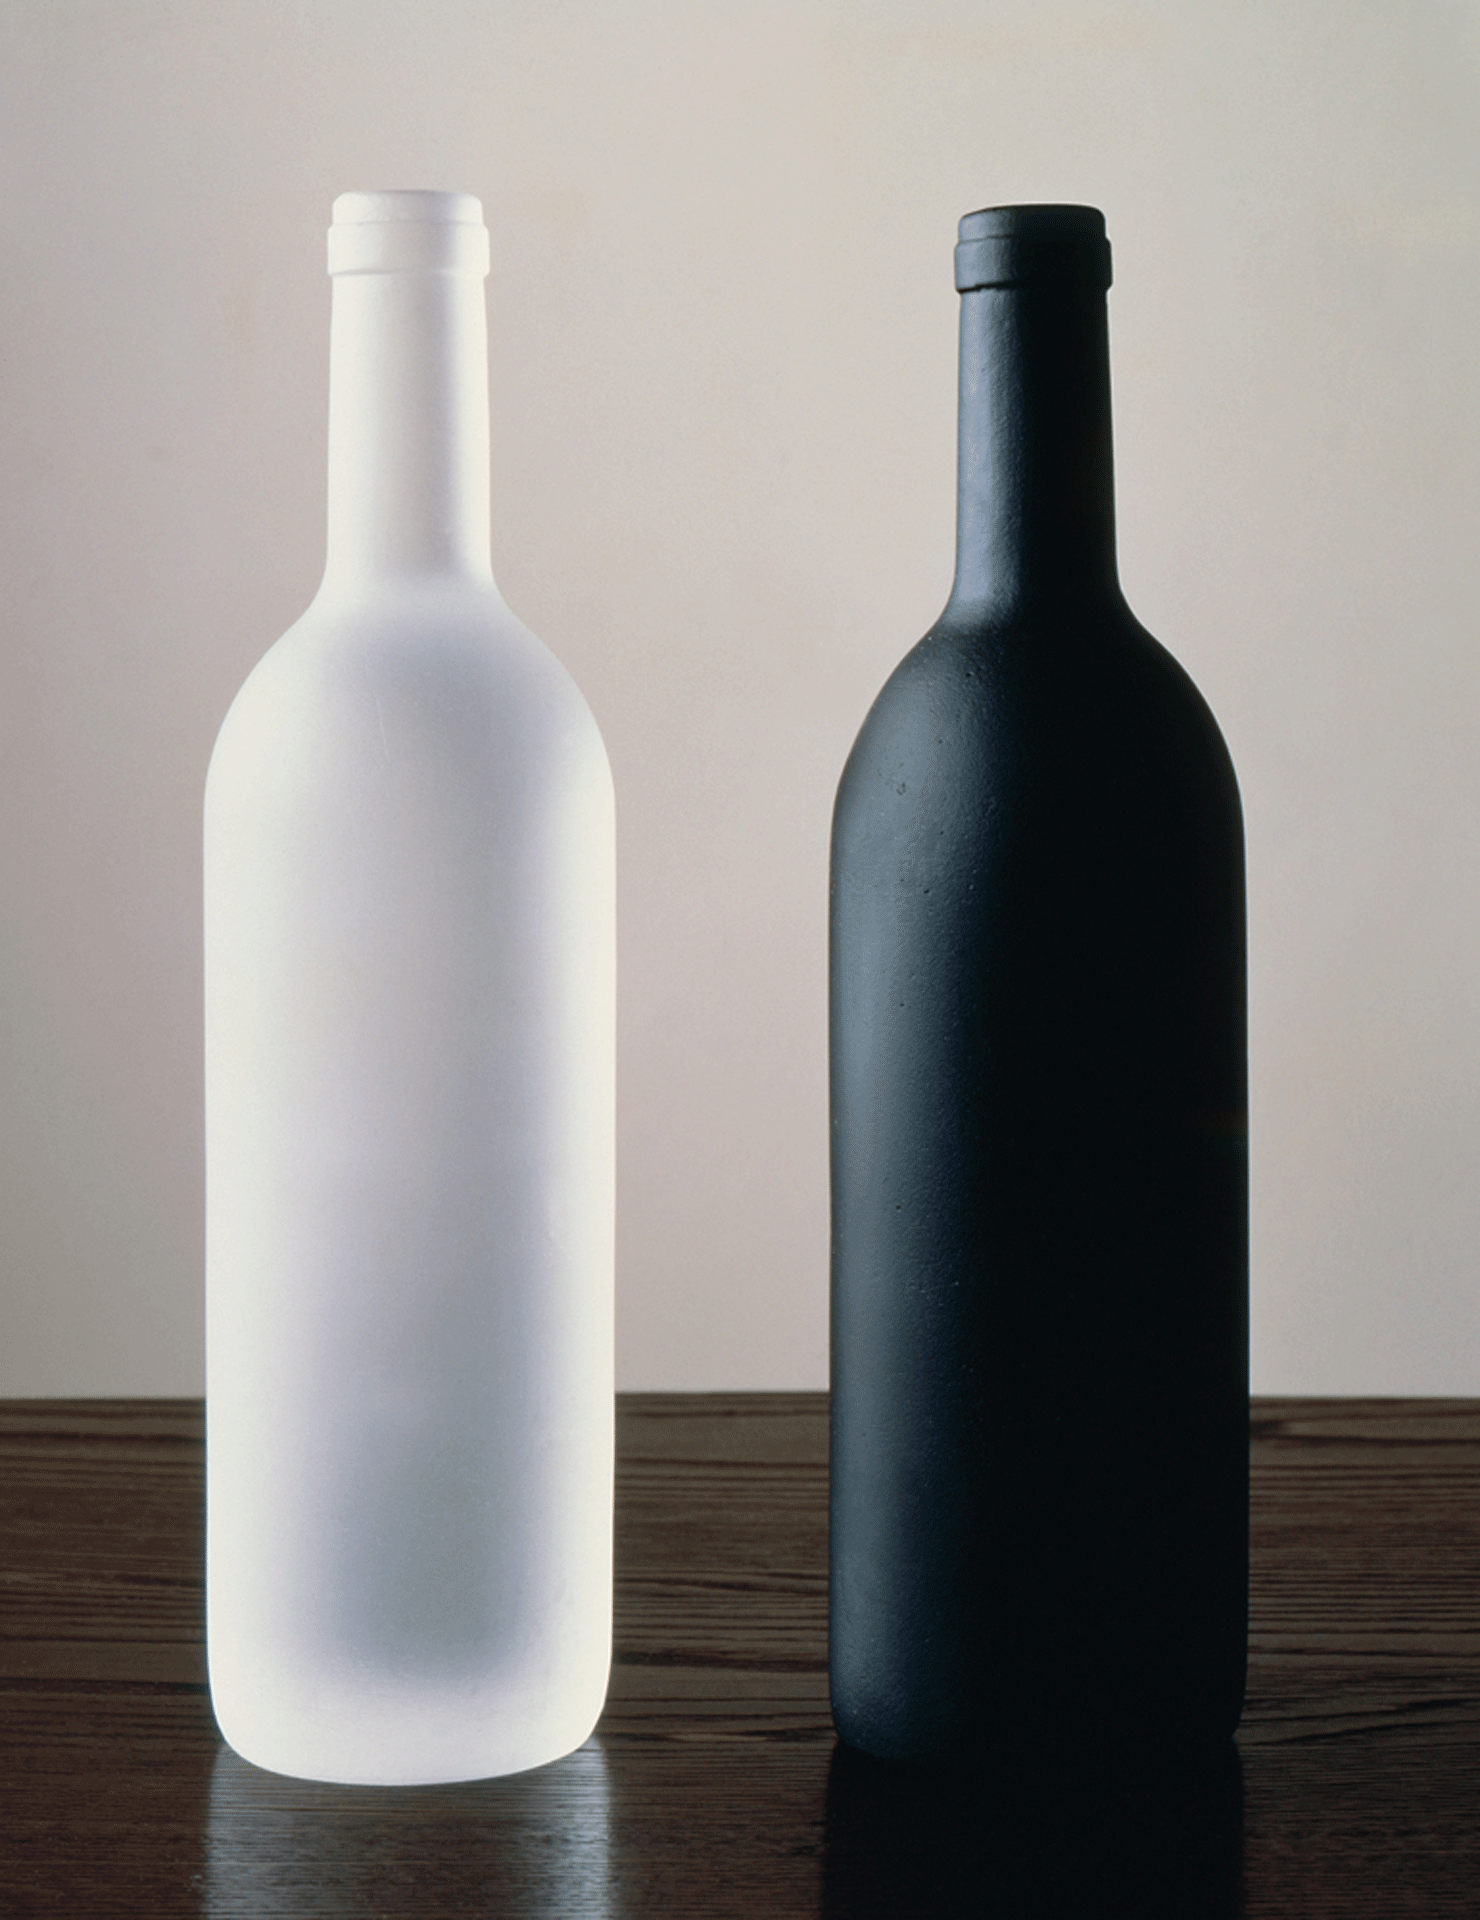 A sculpture by Sherrie Levine, titled, Black and White Bottles, dated 1992.